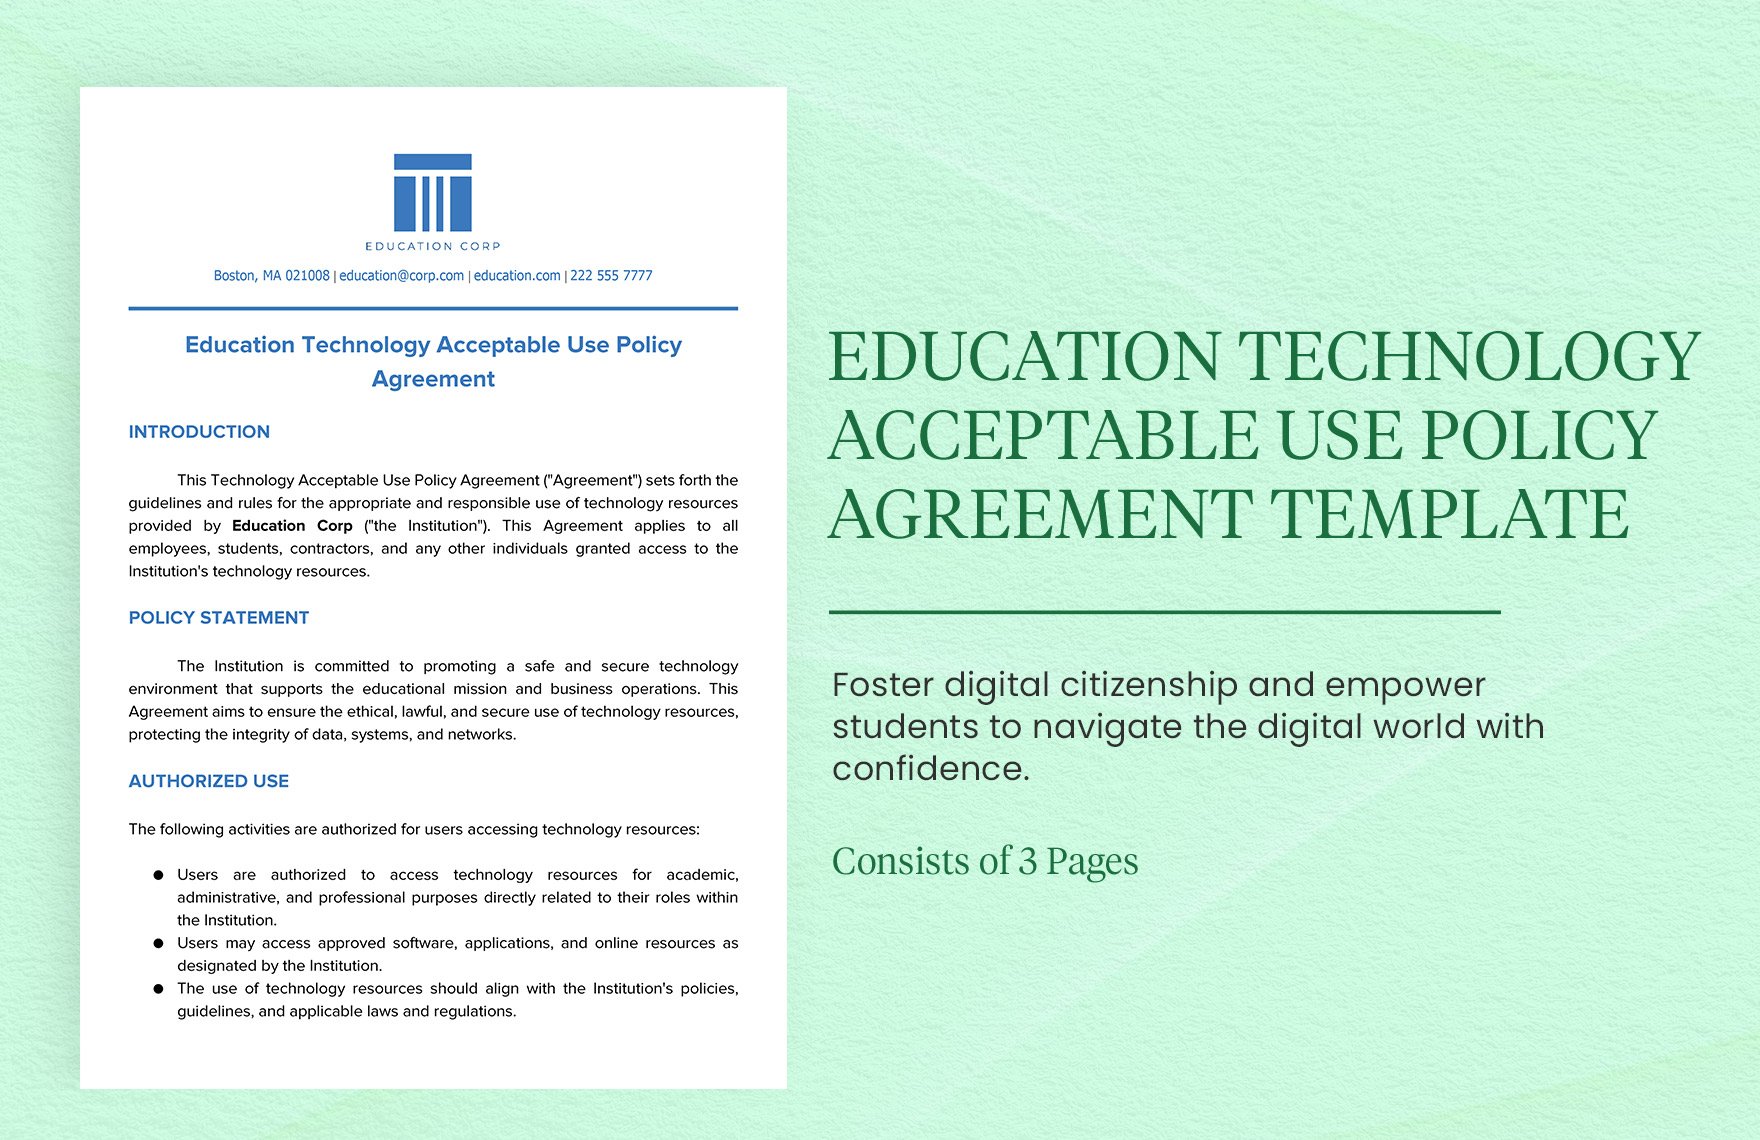 Education Technology Acceptable Use Policy Agreement Template